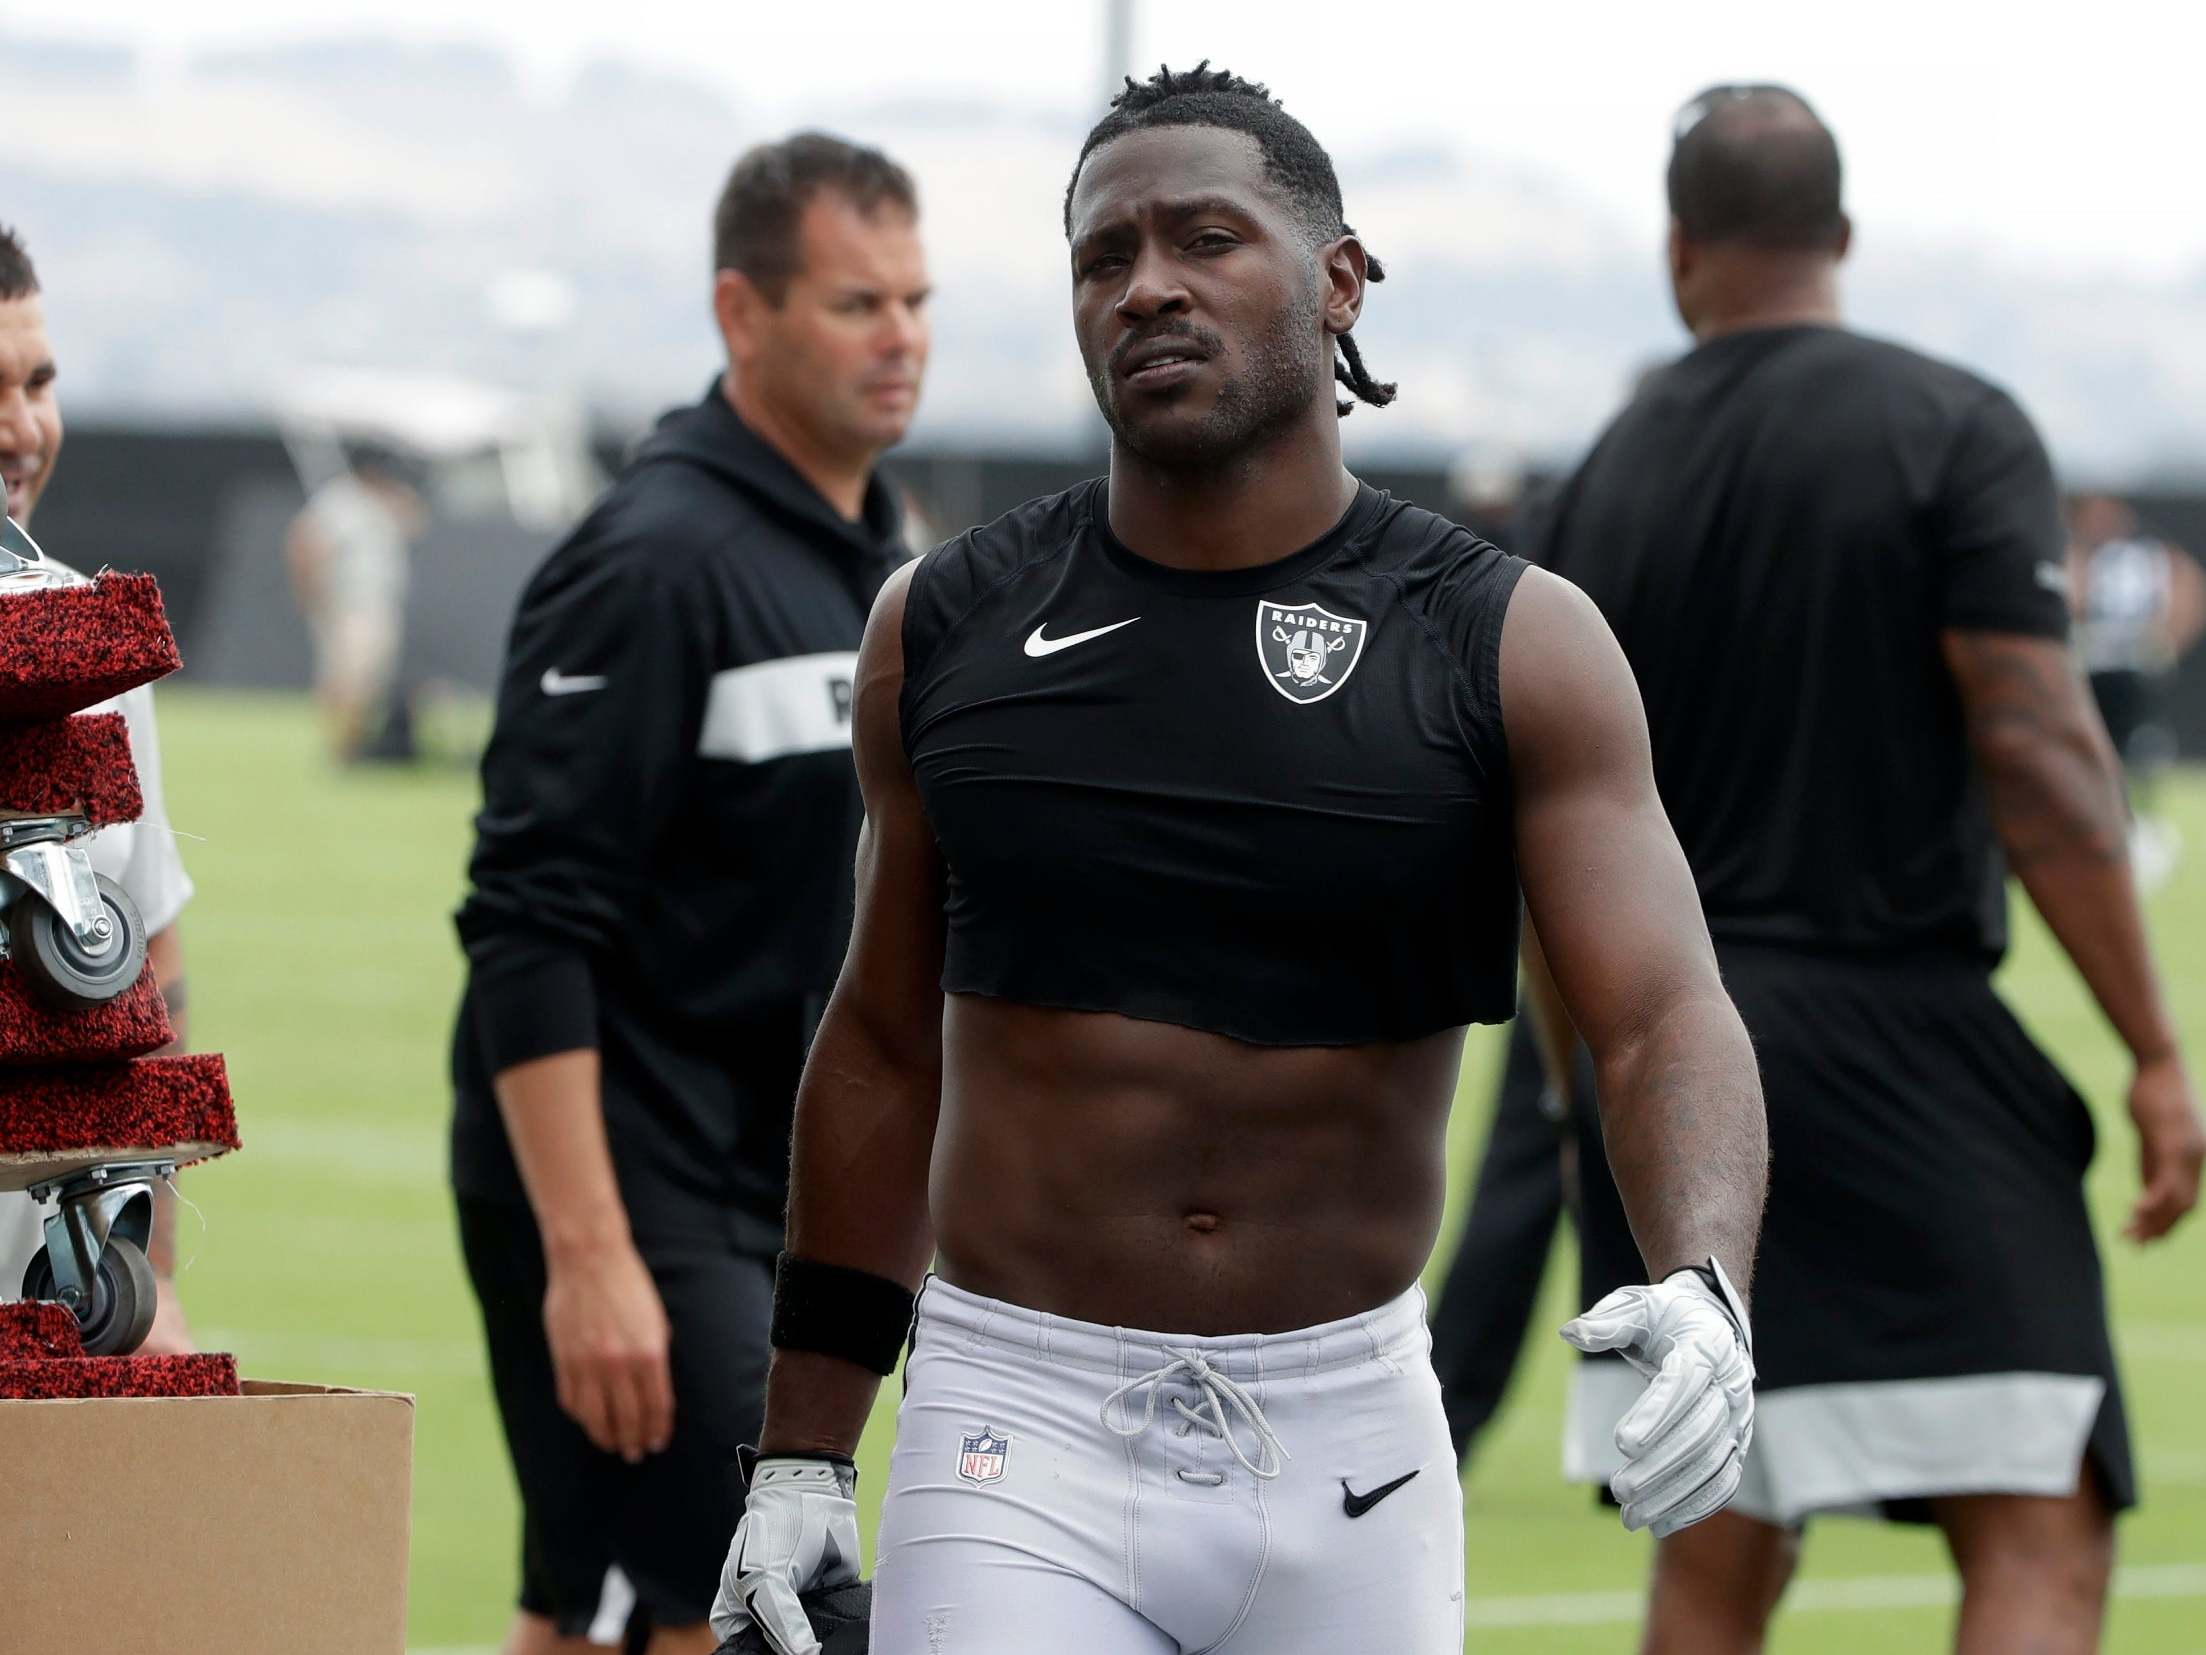 Antonio Brown had been involved in a public fallout with the Oakland Raiders